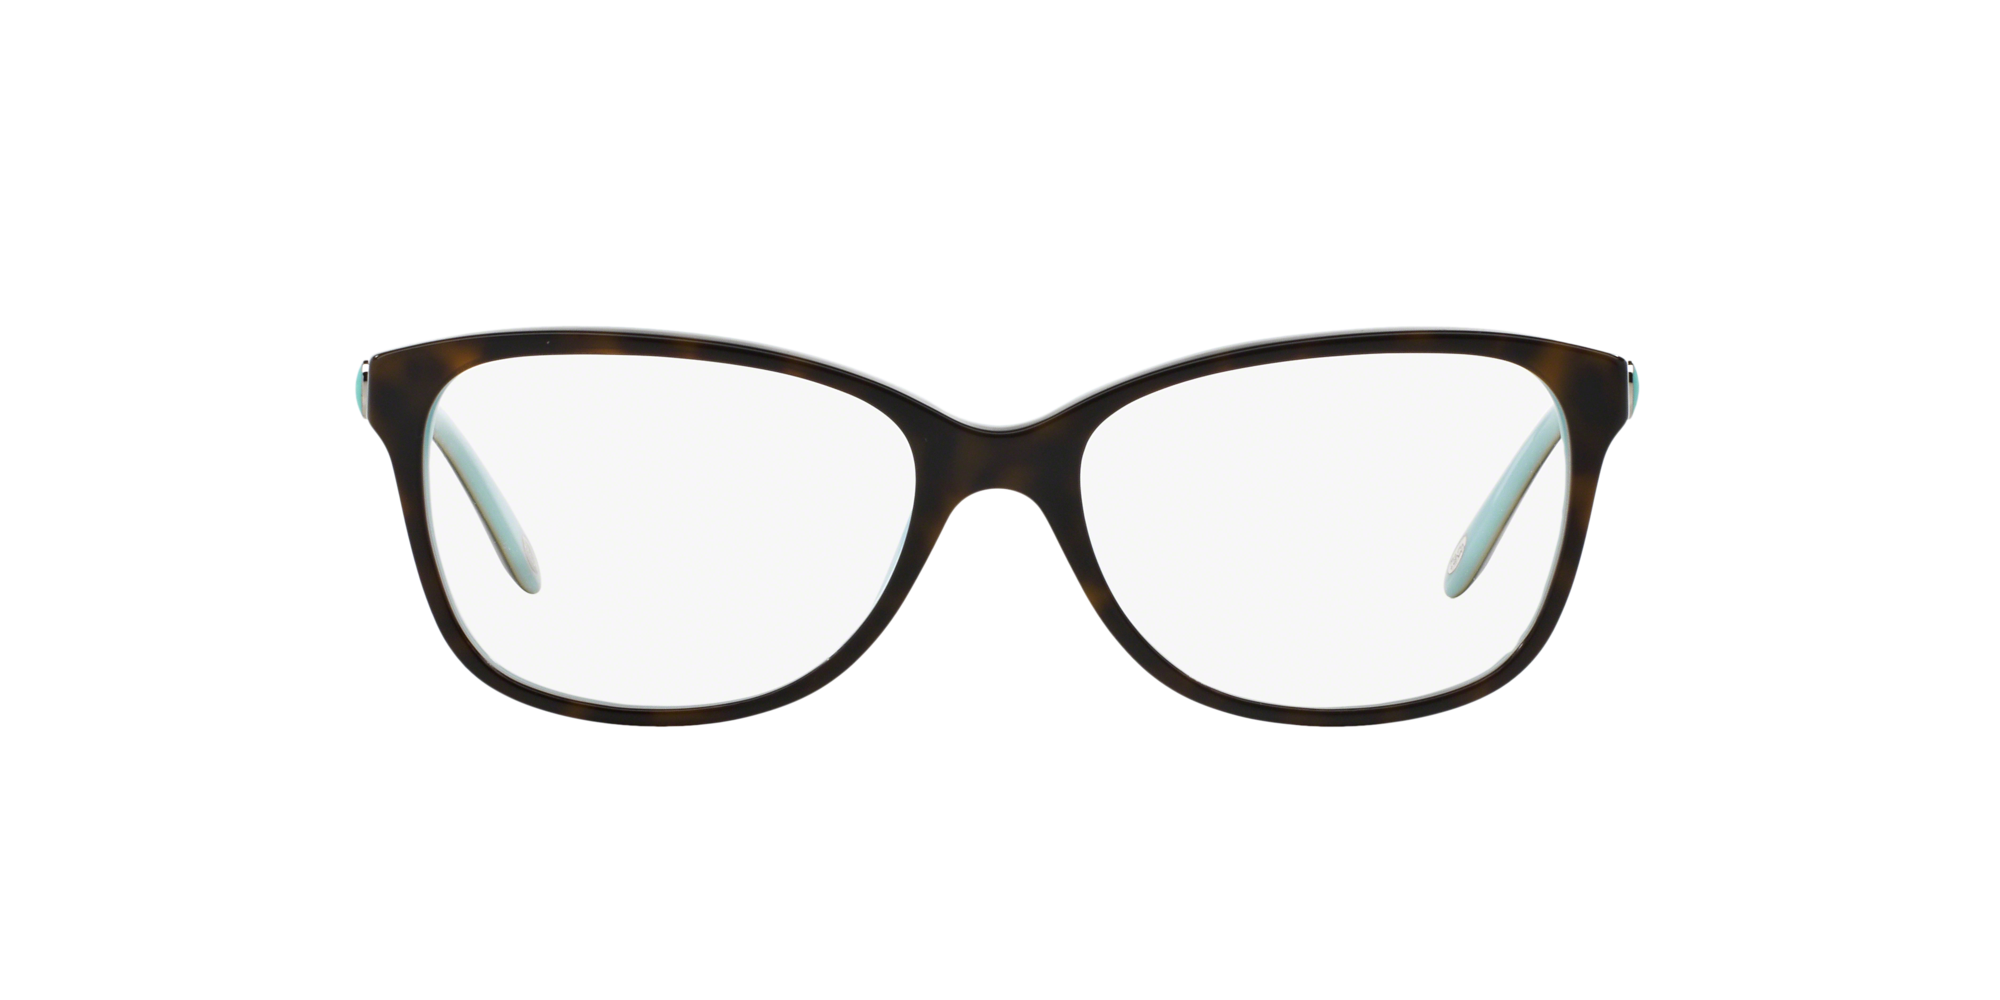 tiffany and co glasses lenscrafters